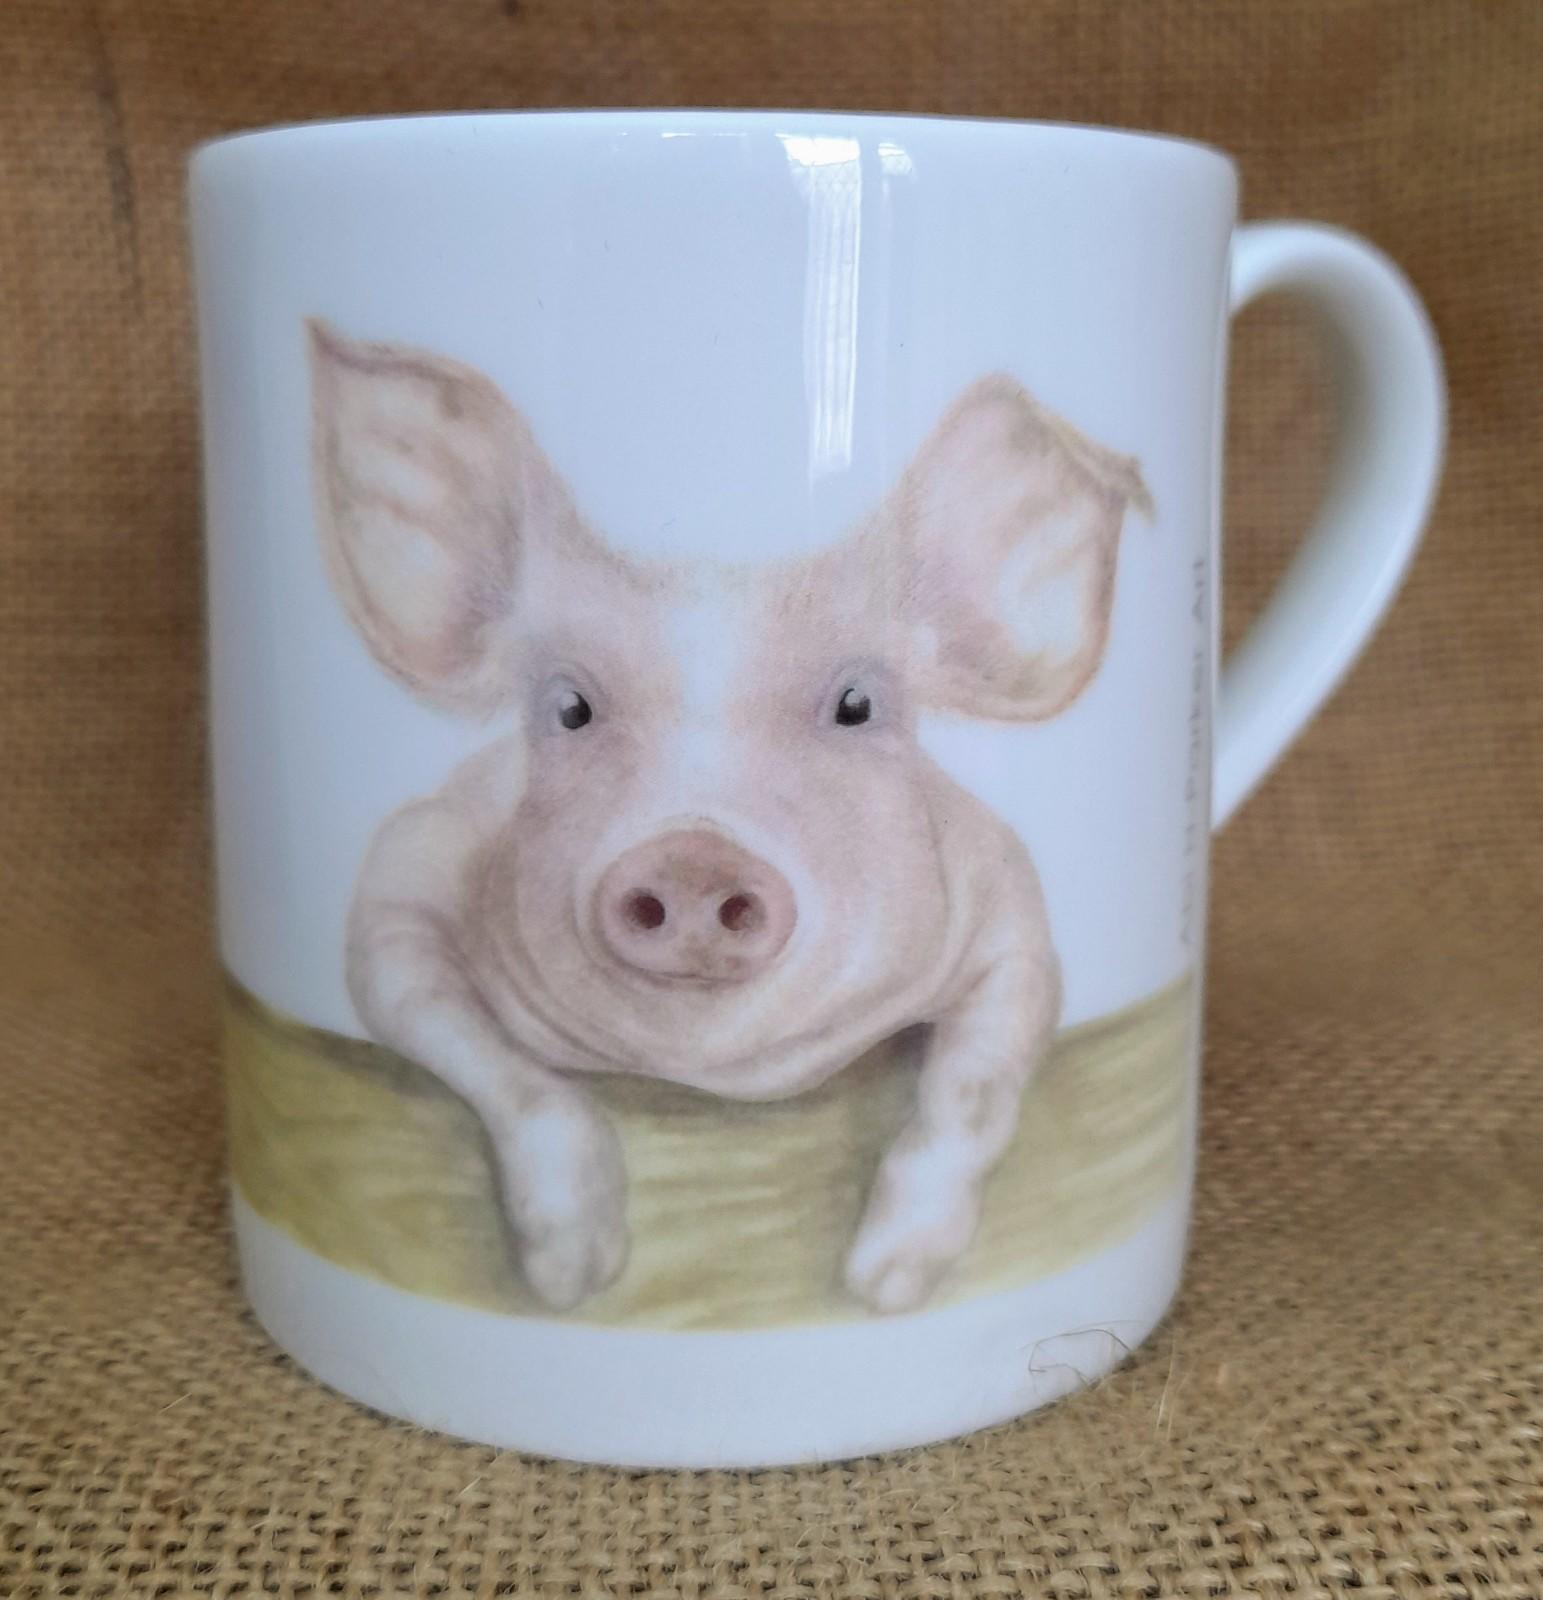 Mr Pig chine cup close up